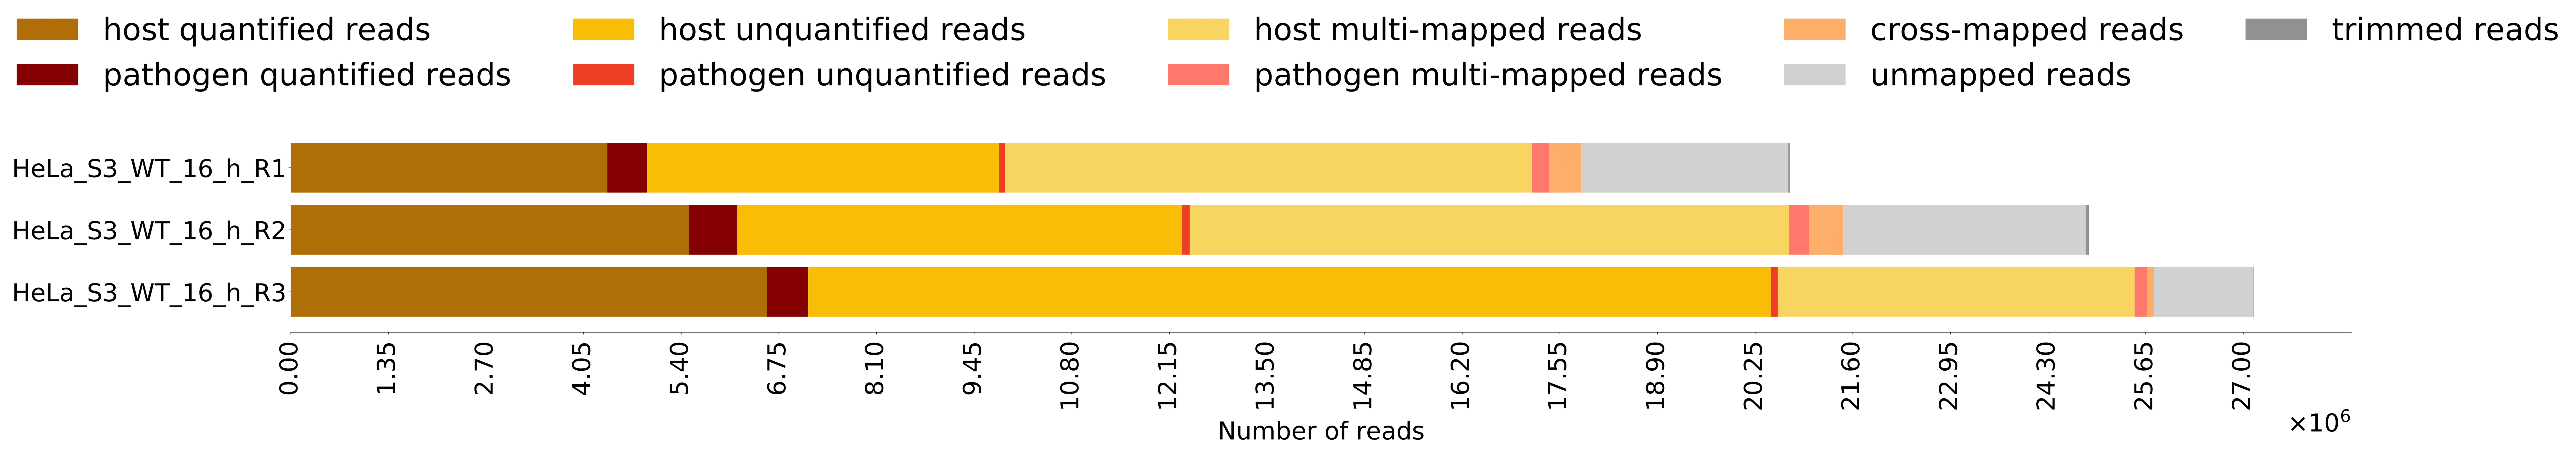 mapping_stats_star_samples_total_reads